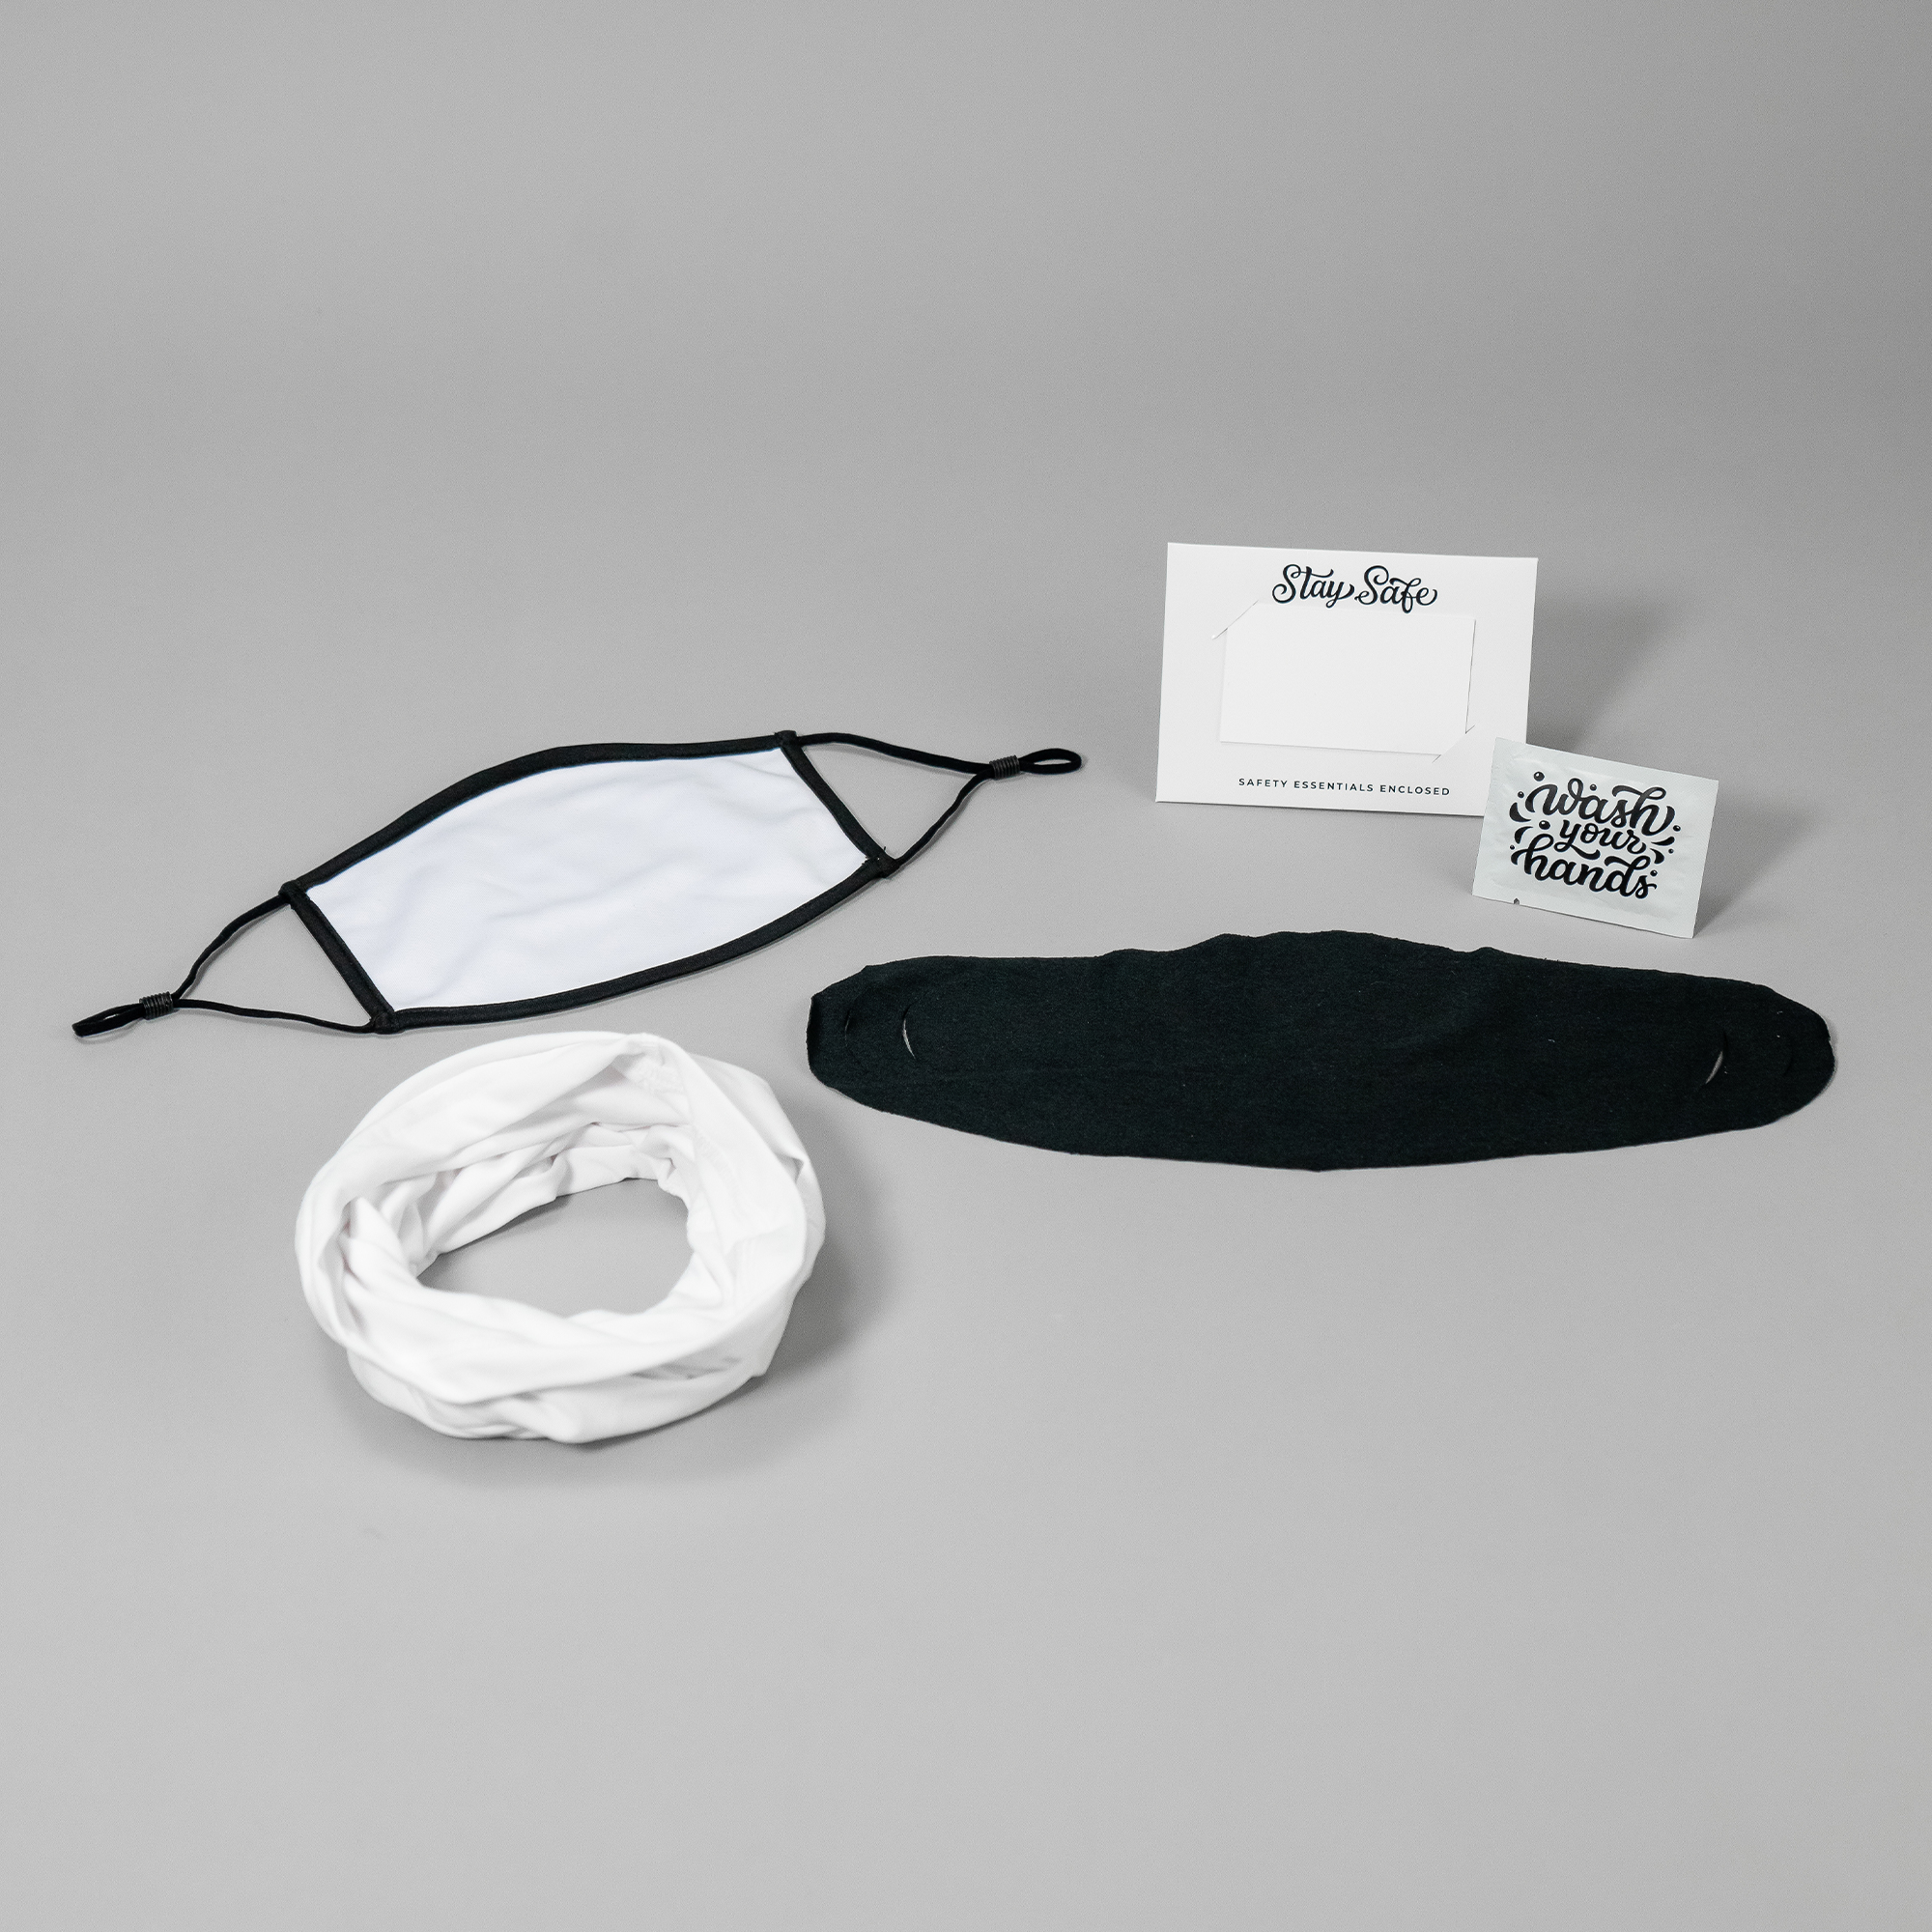 Picture of Keller Williams Peninsula Estates Safety Products